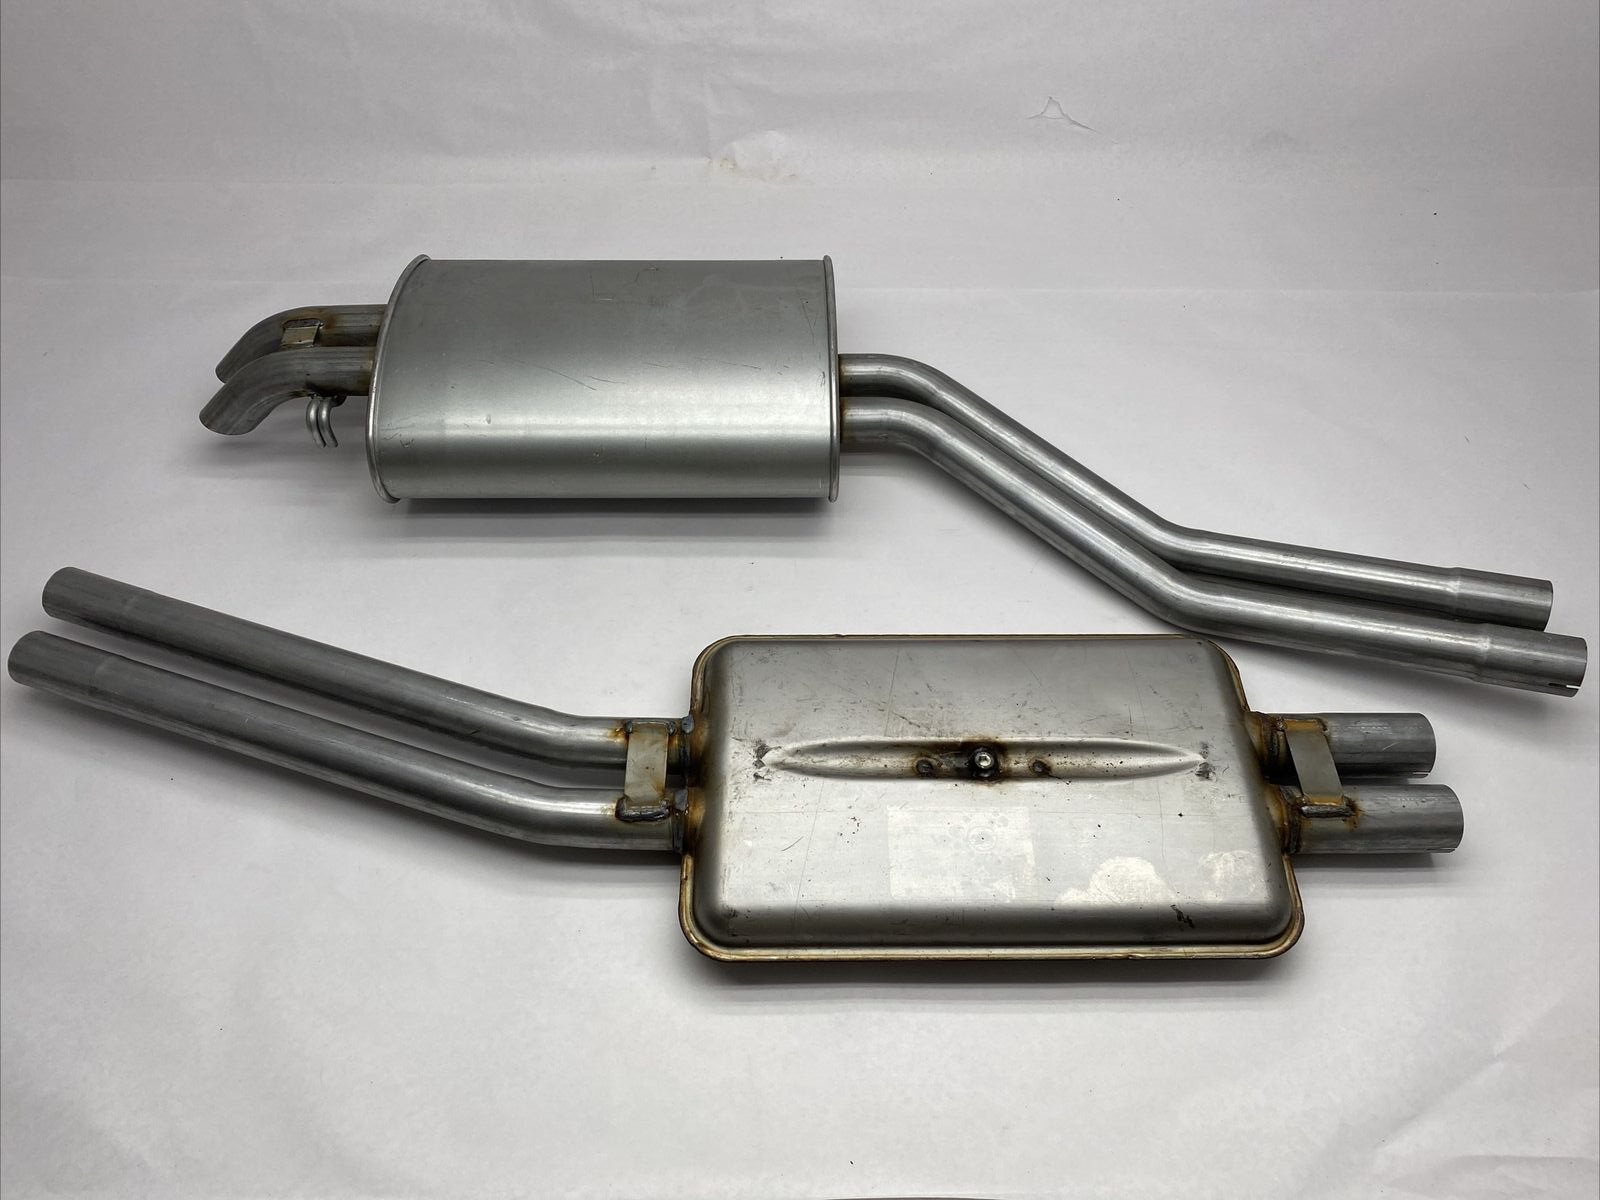 Exhaust Kit Fits Mercedes R107 280SL 350SL 450SL up to 08/1985